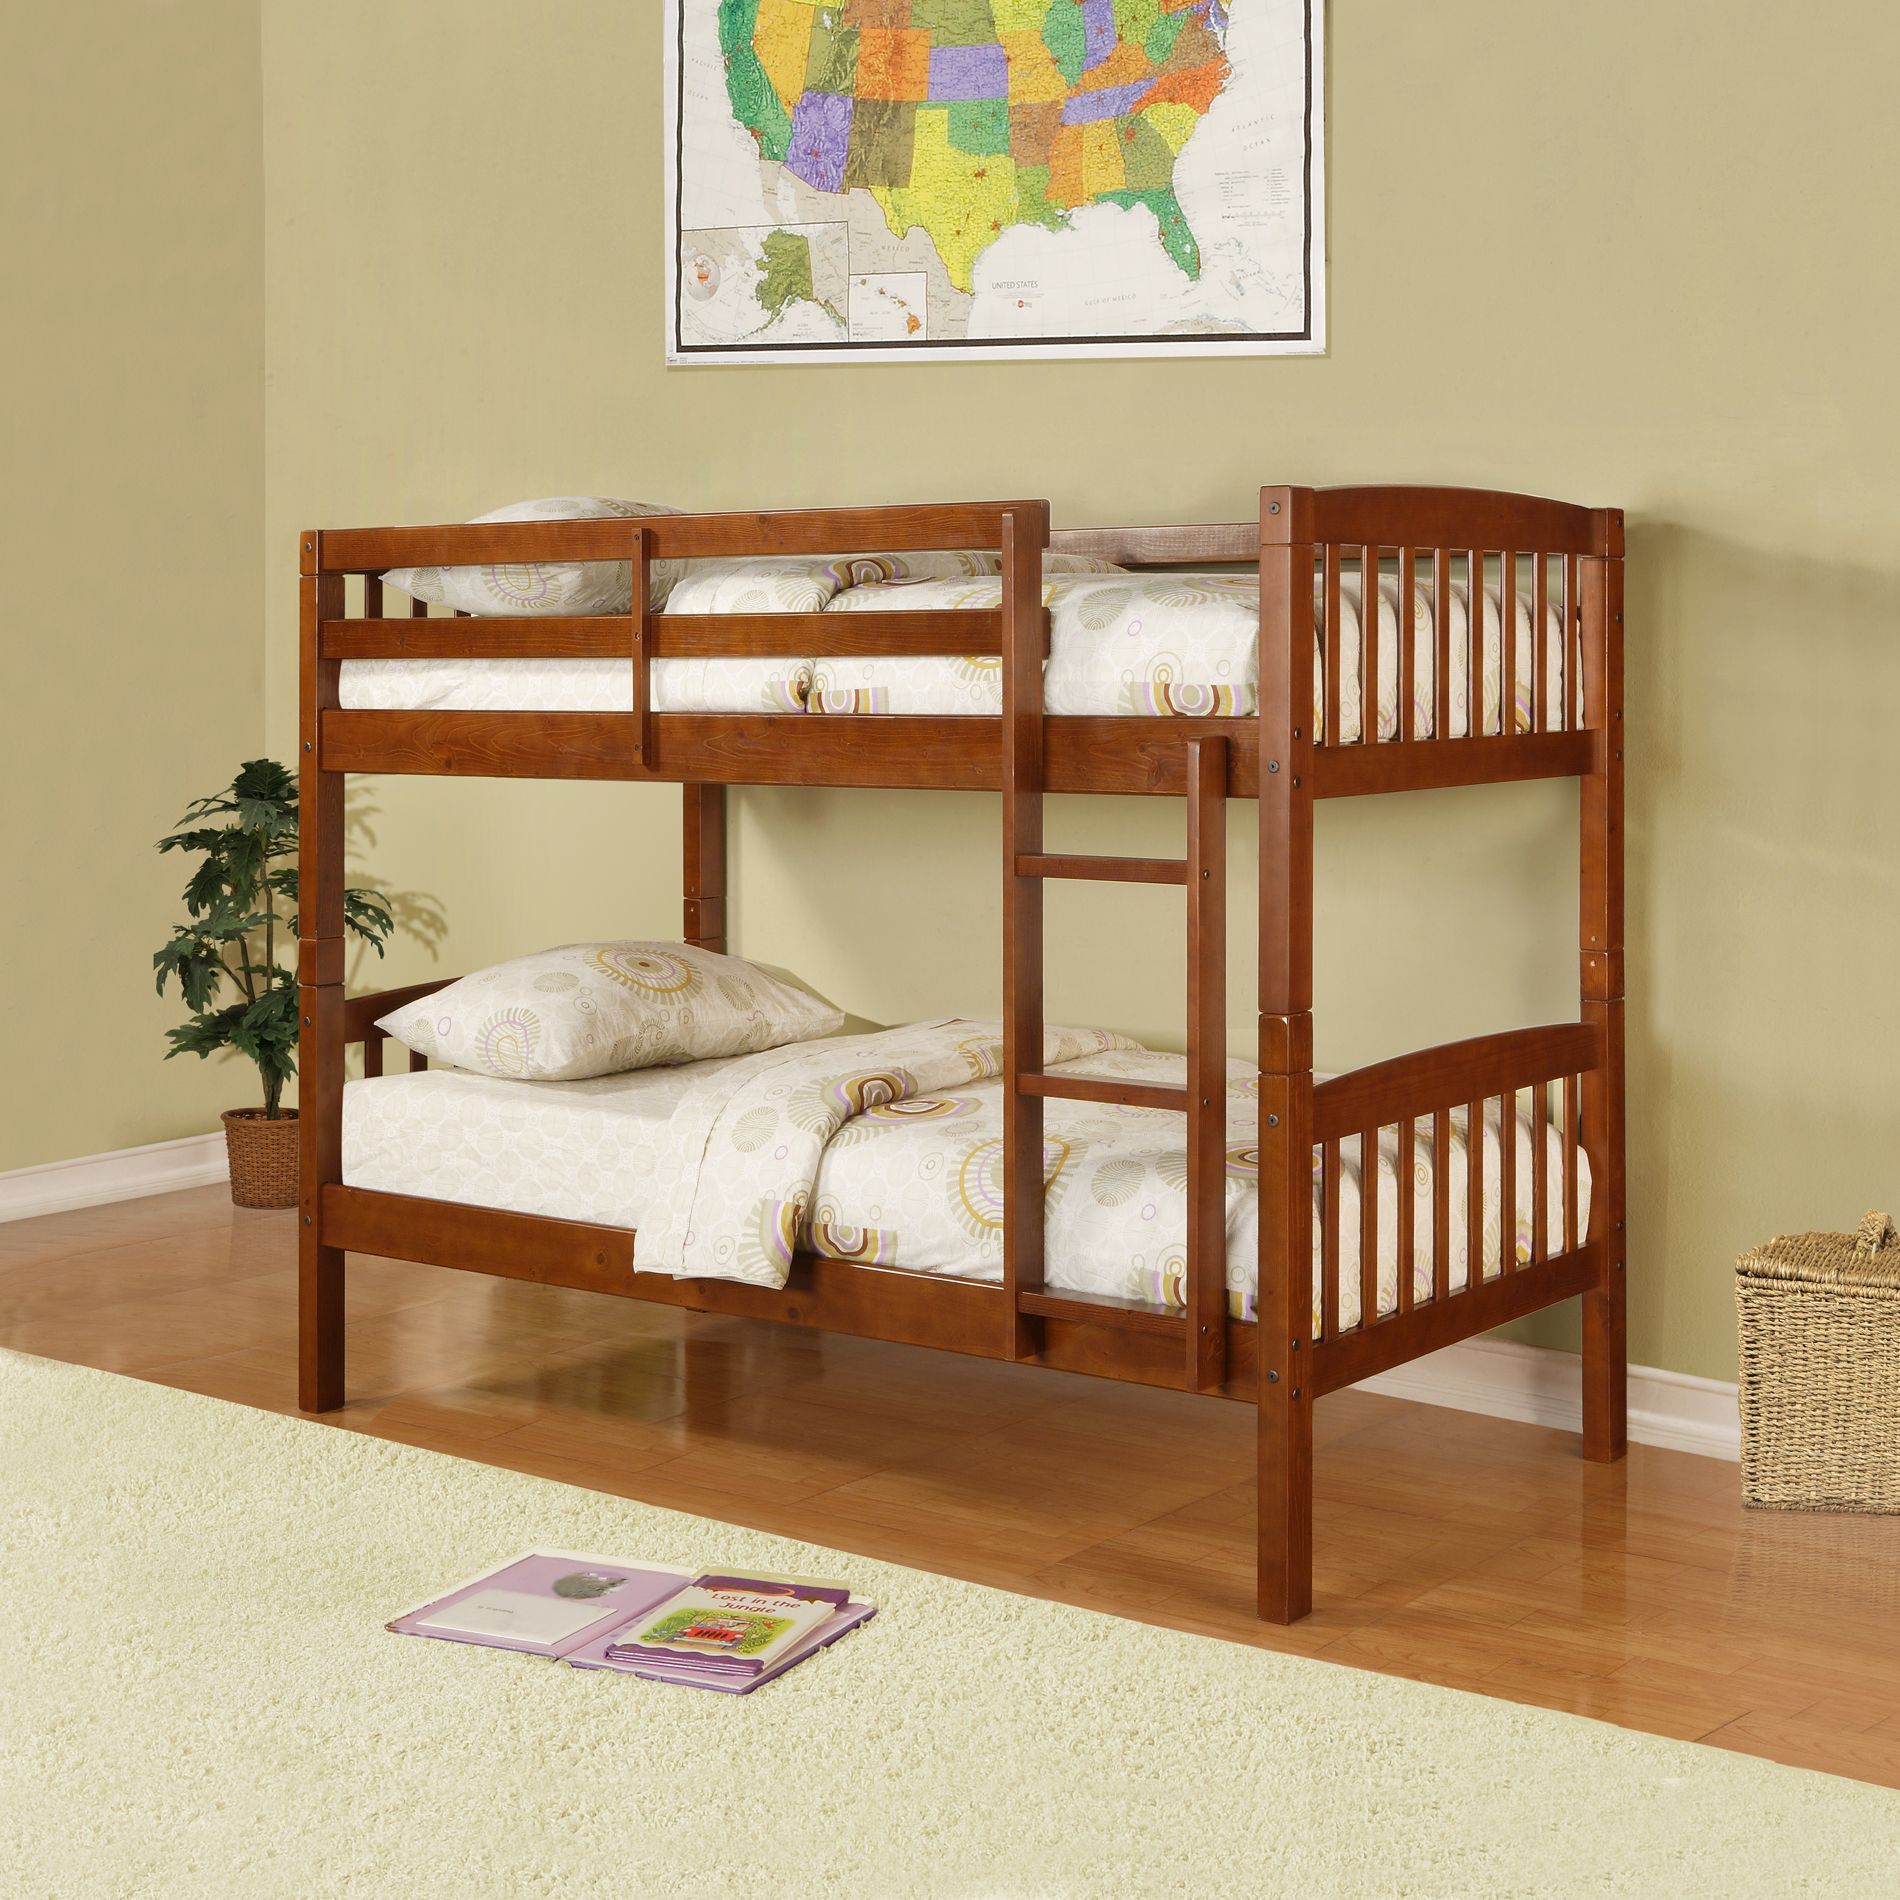 Kids Beds: Shop Beds, Trundles, Lofts and Bunk Beds for Kids at Sears